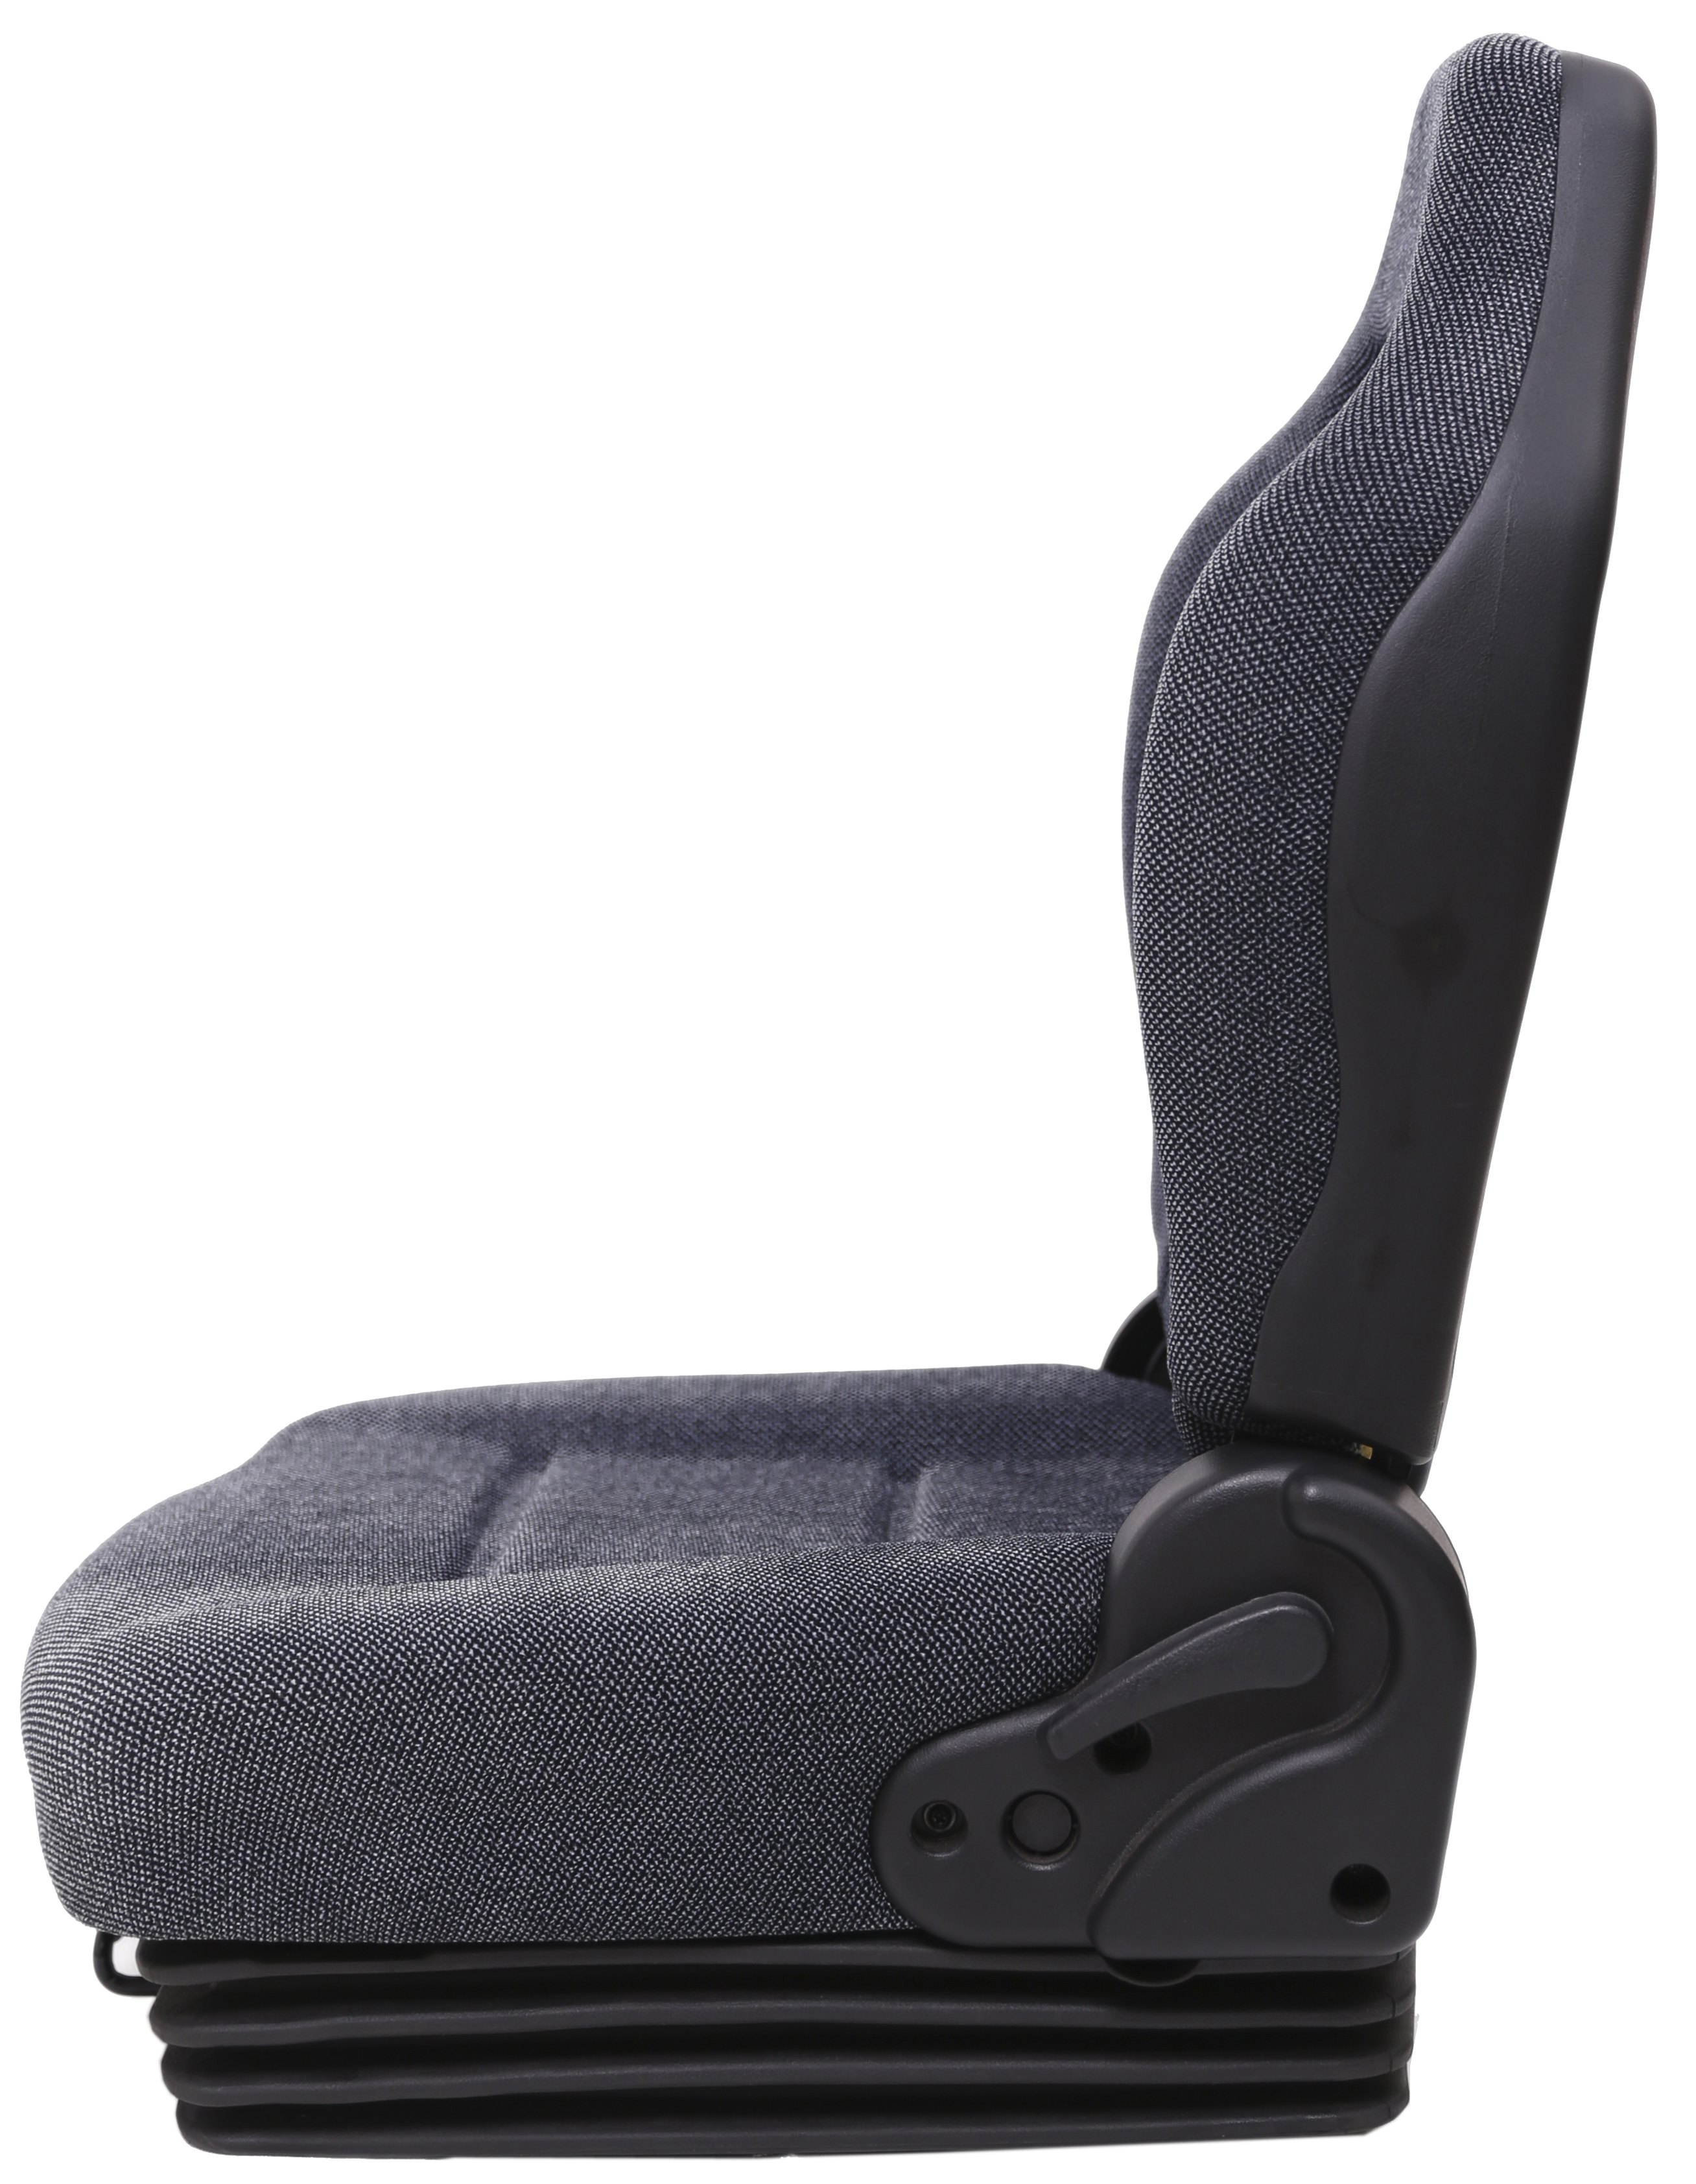 Quality Forklift Seat with Mechanical Suspension for Reach Truck Seat BF6